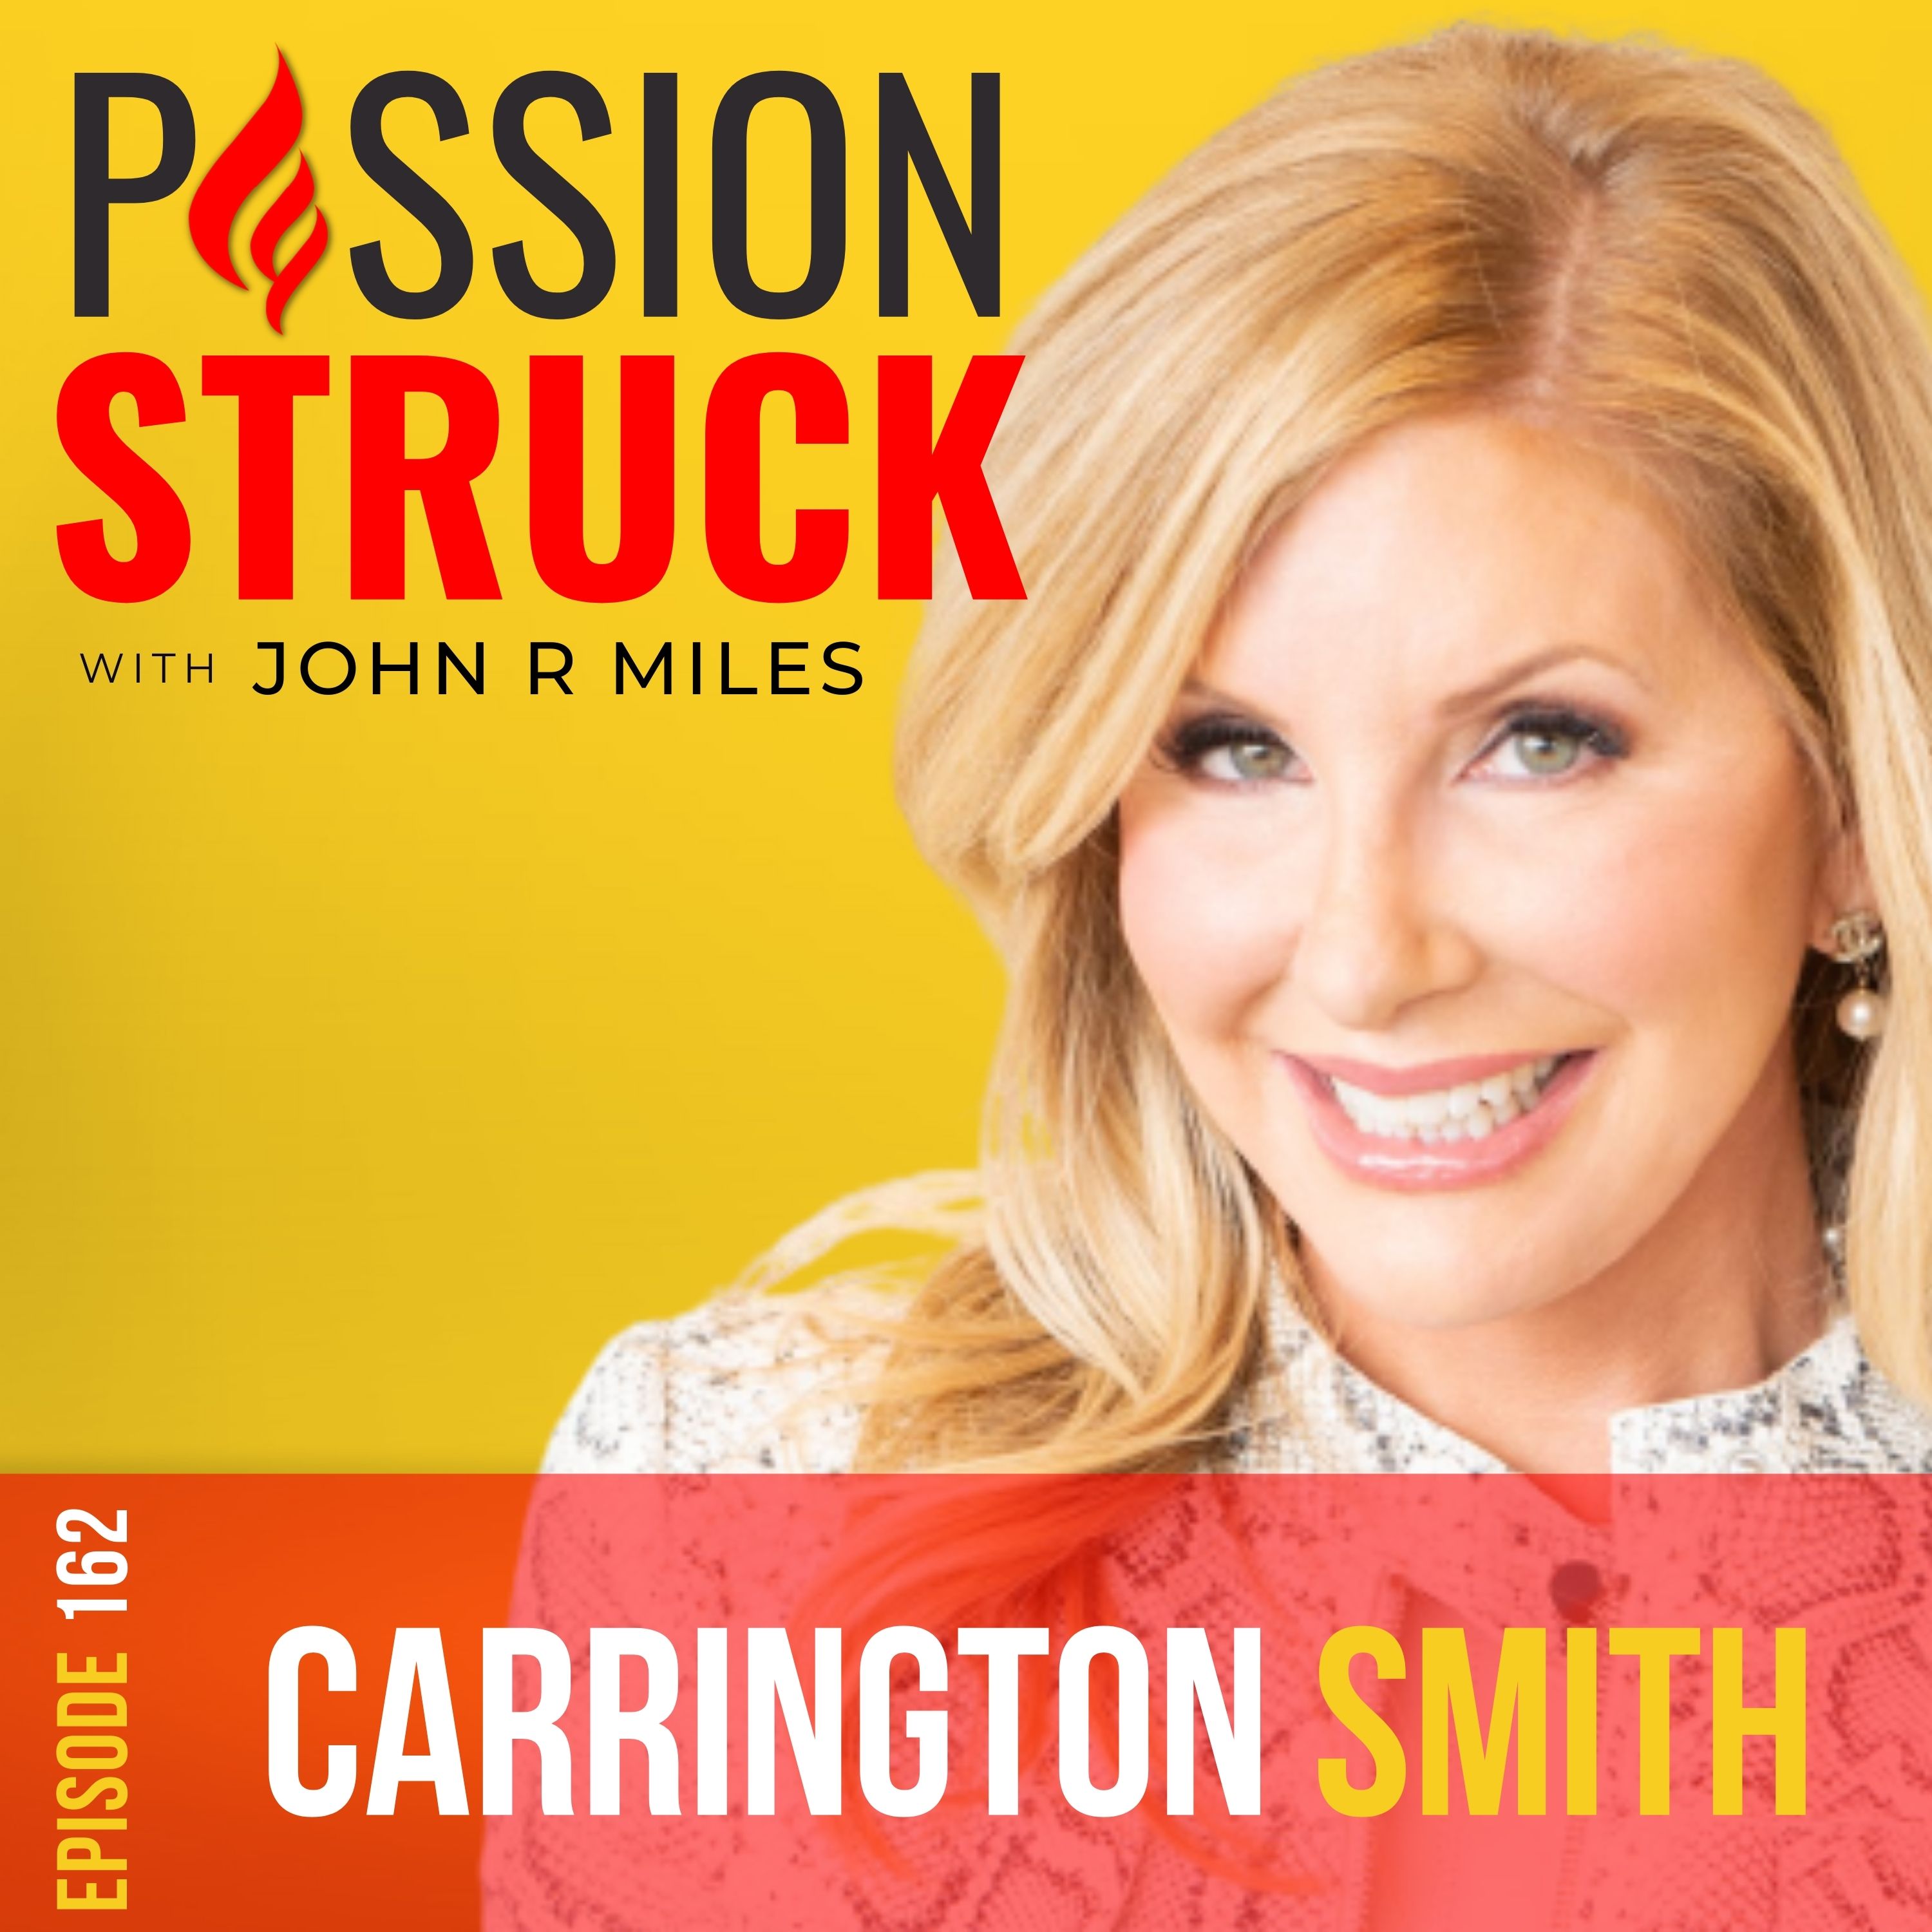 Passion Struck with John R. Miles album cover episode 162 with Carrington Smith on defining moments